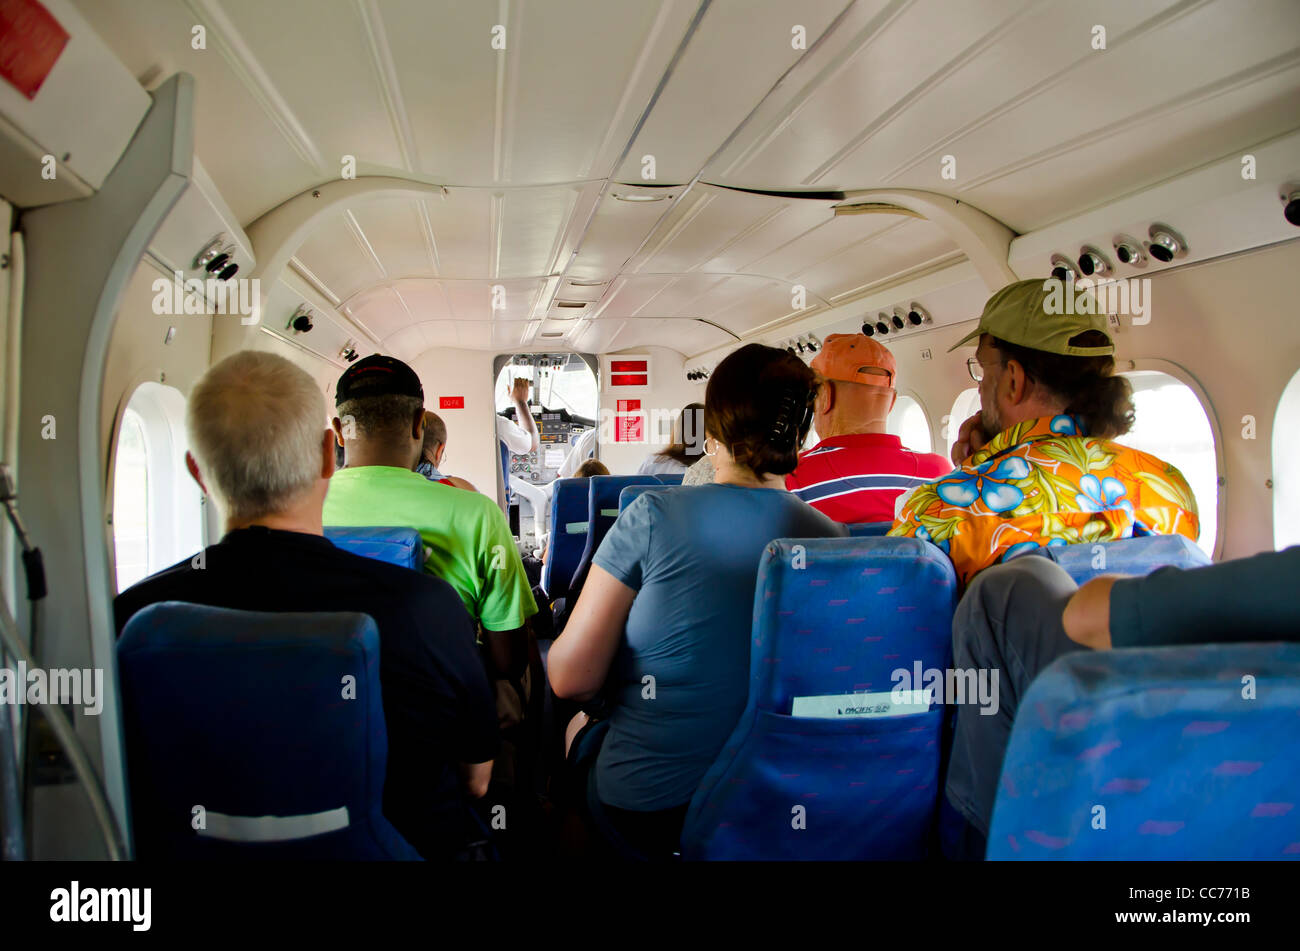 Fiji Sun Air small prop airplane interior with cramped space and passengers Stock Photo